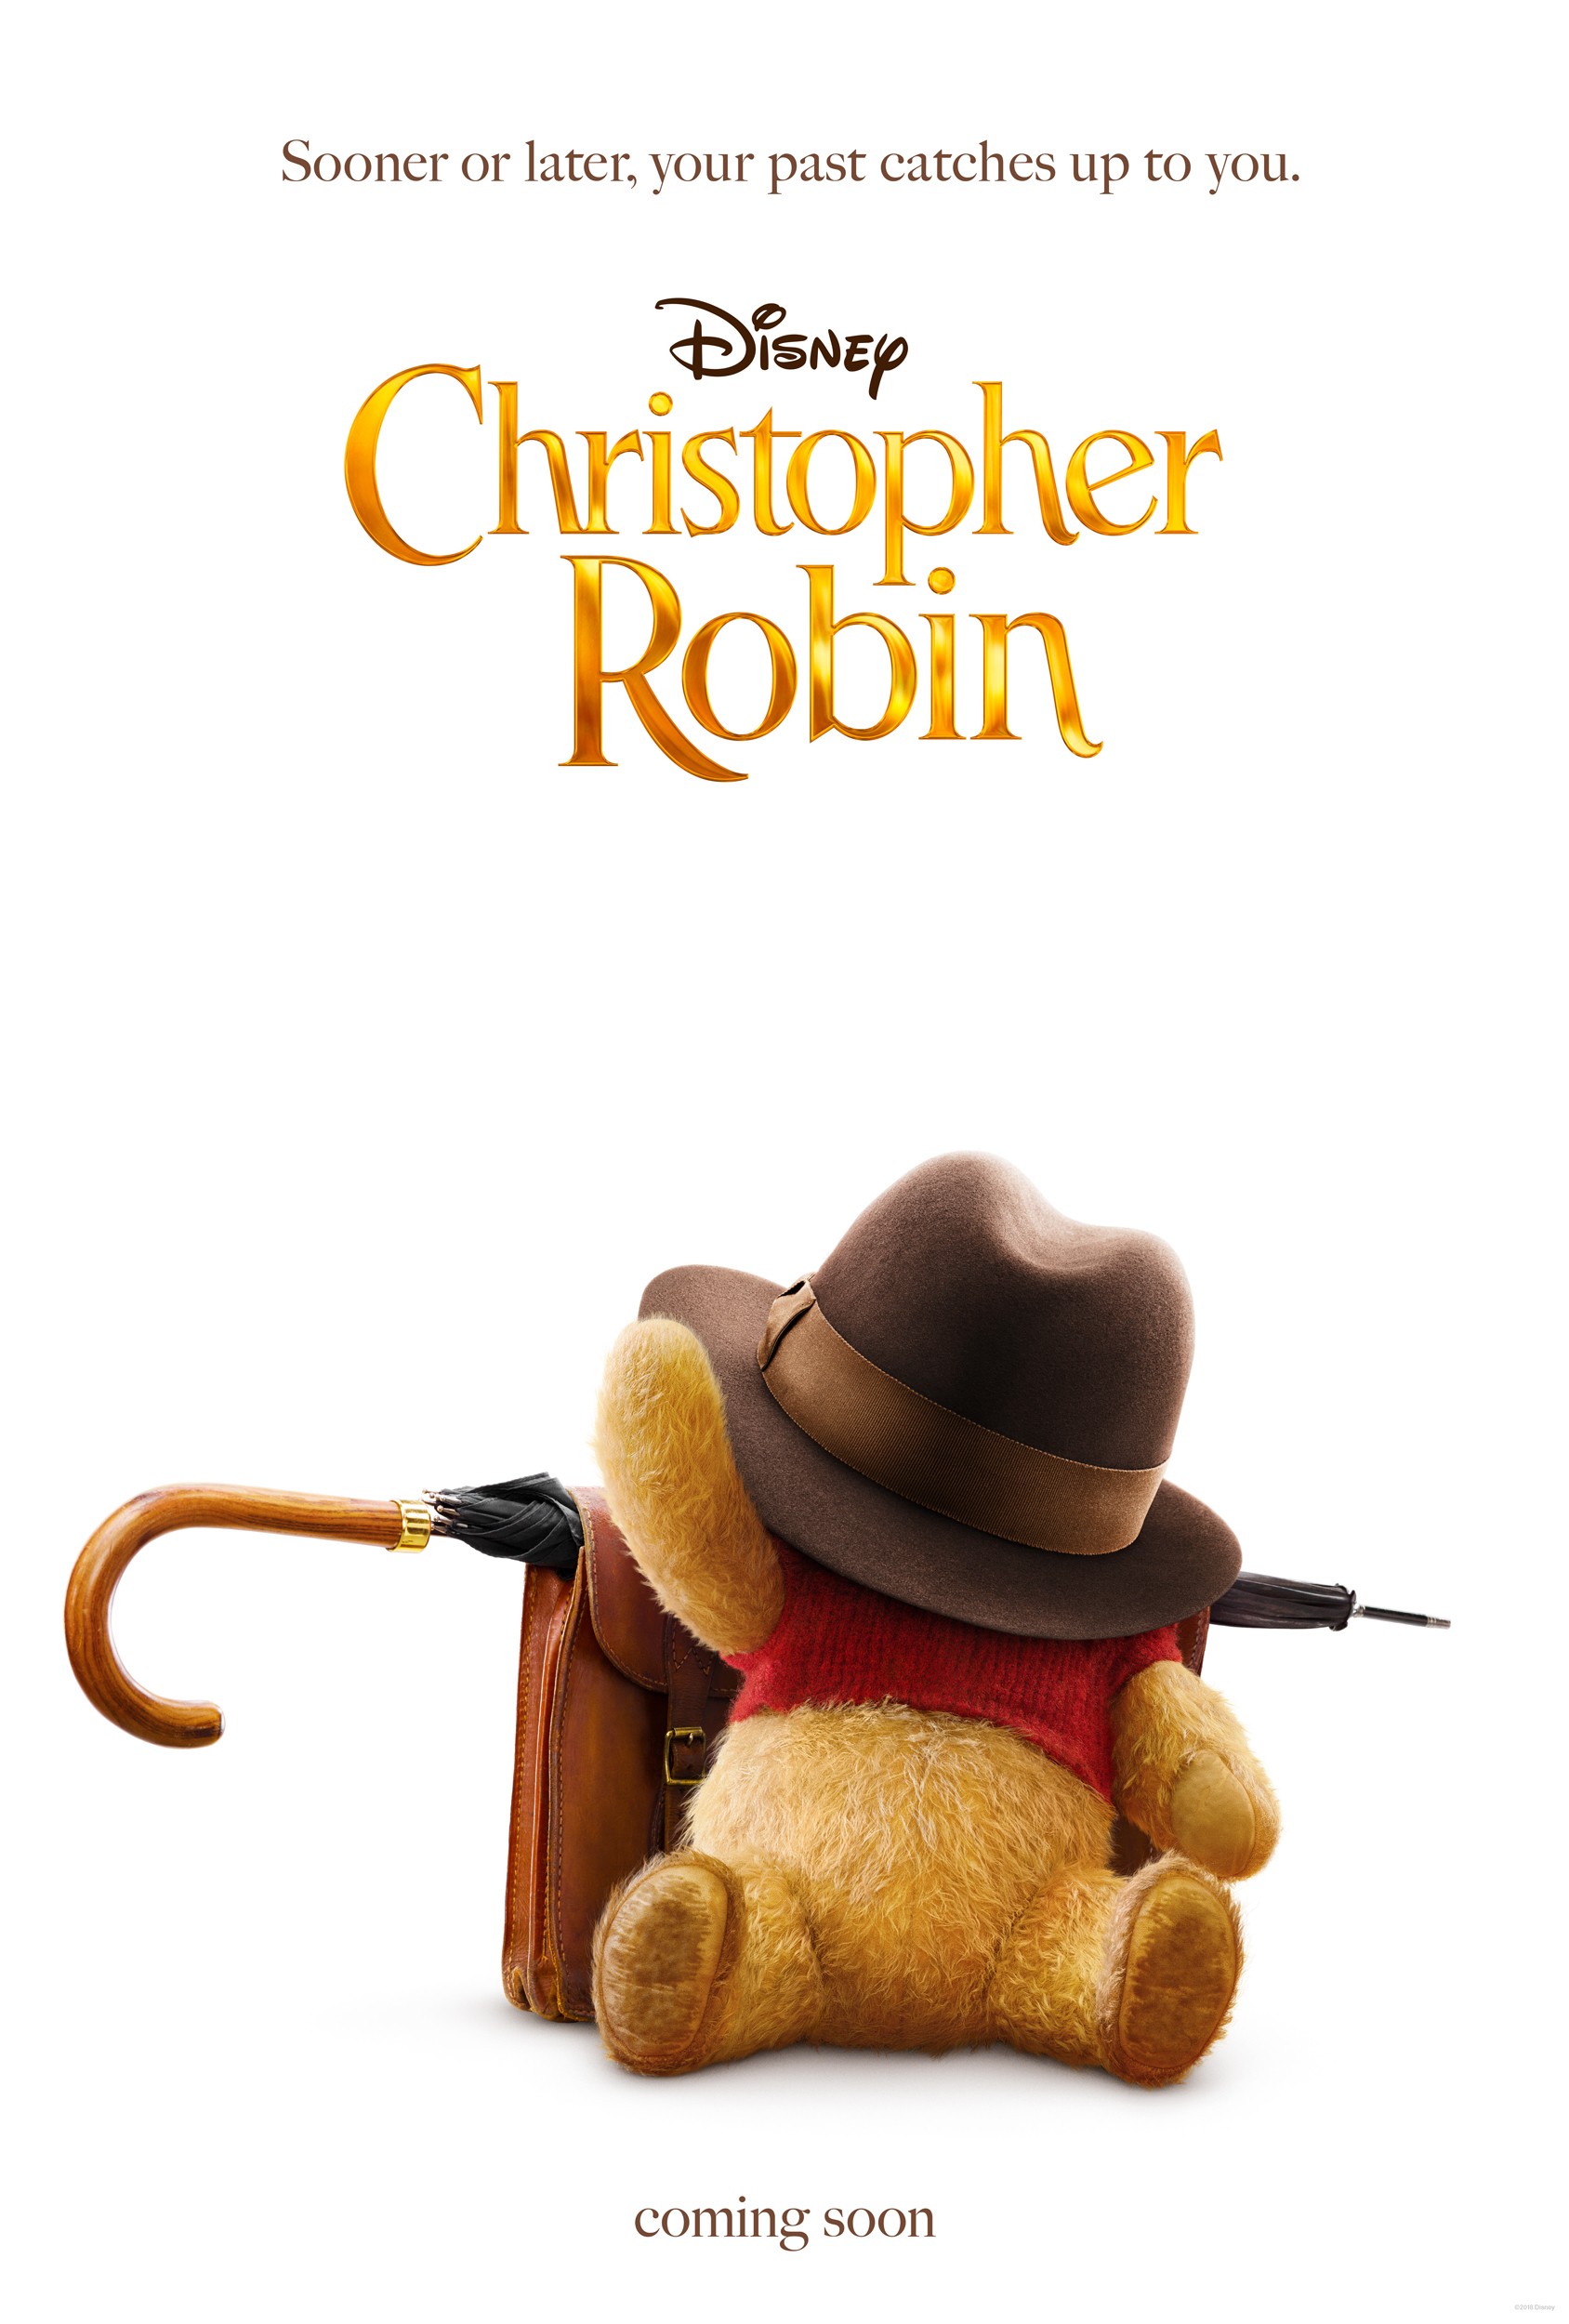 Christopher Robin 2018 Rotten Tomatoes